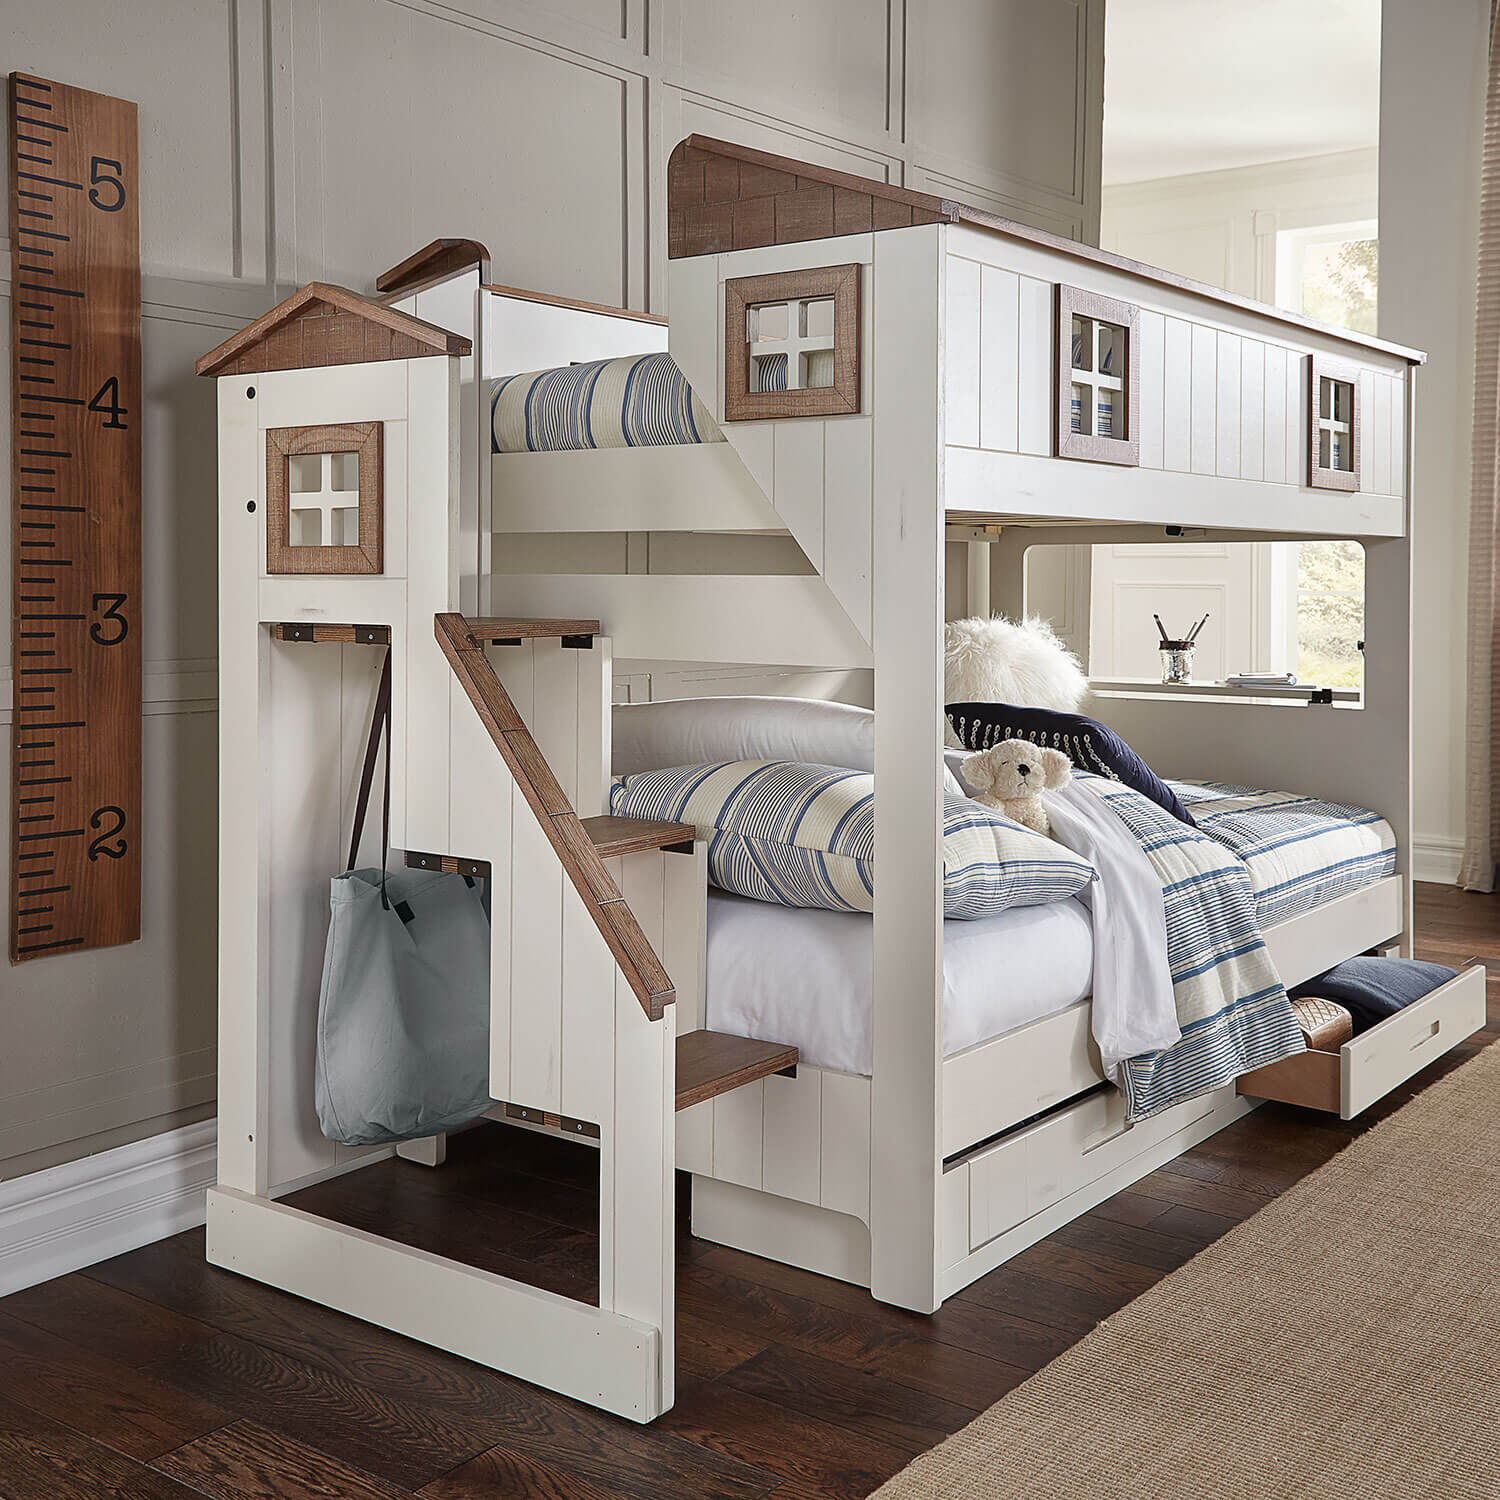 cheap bunk beds with mattress included